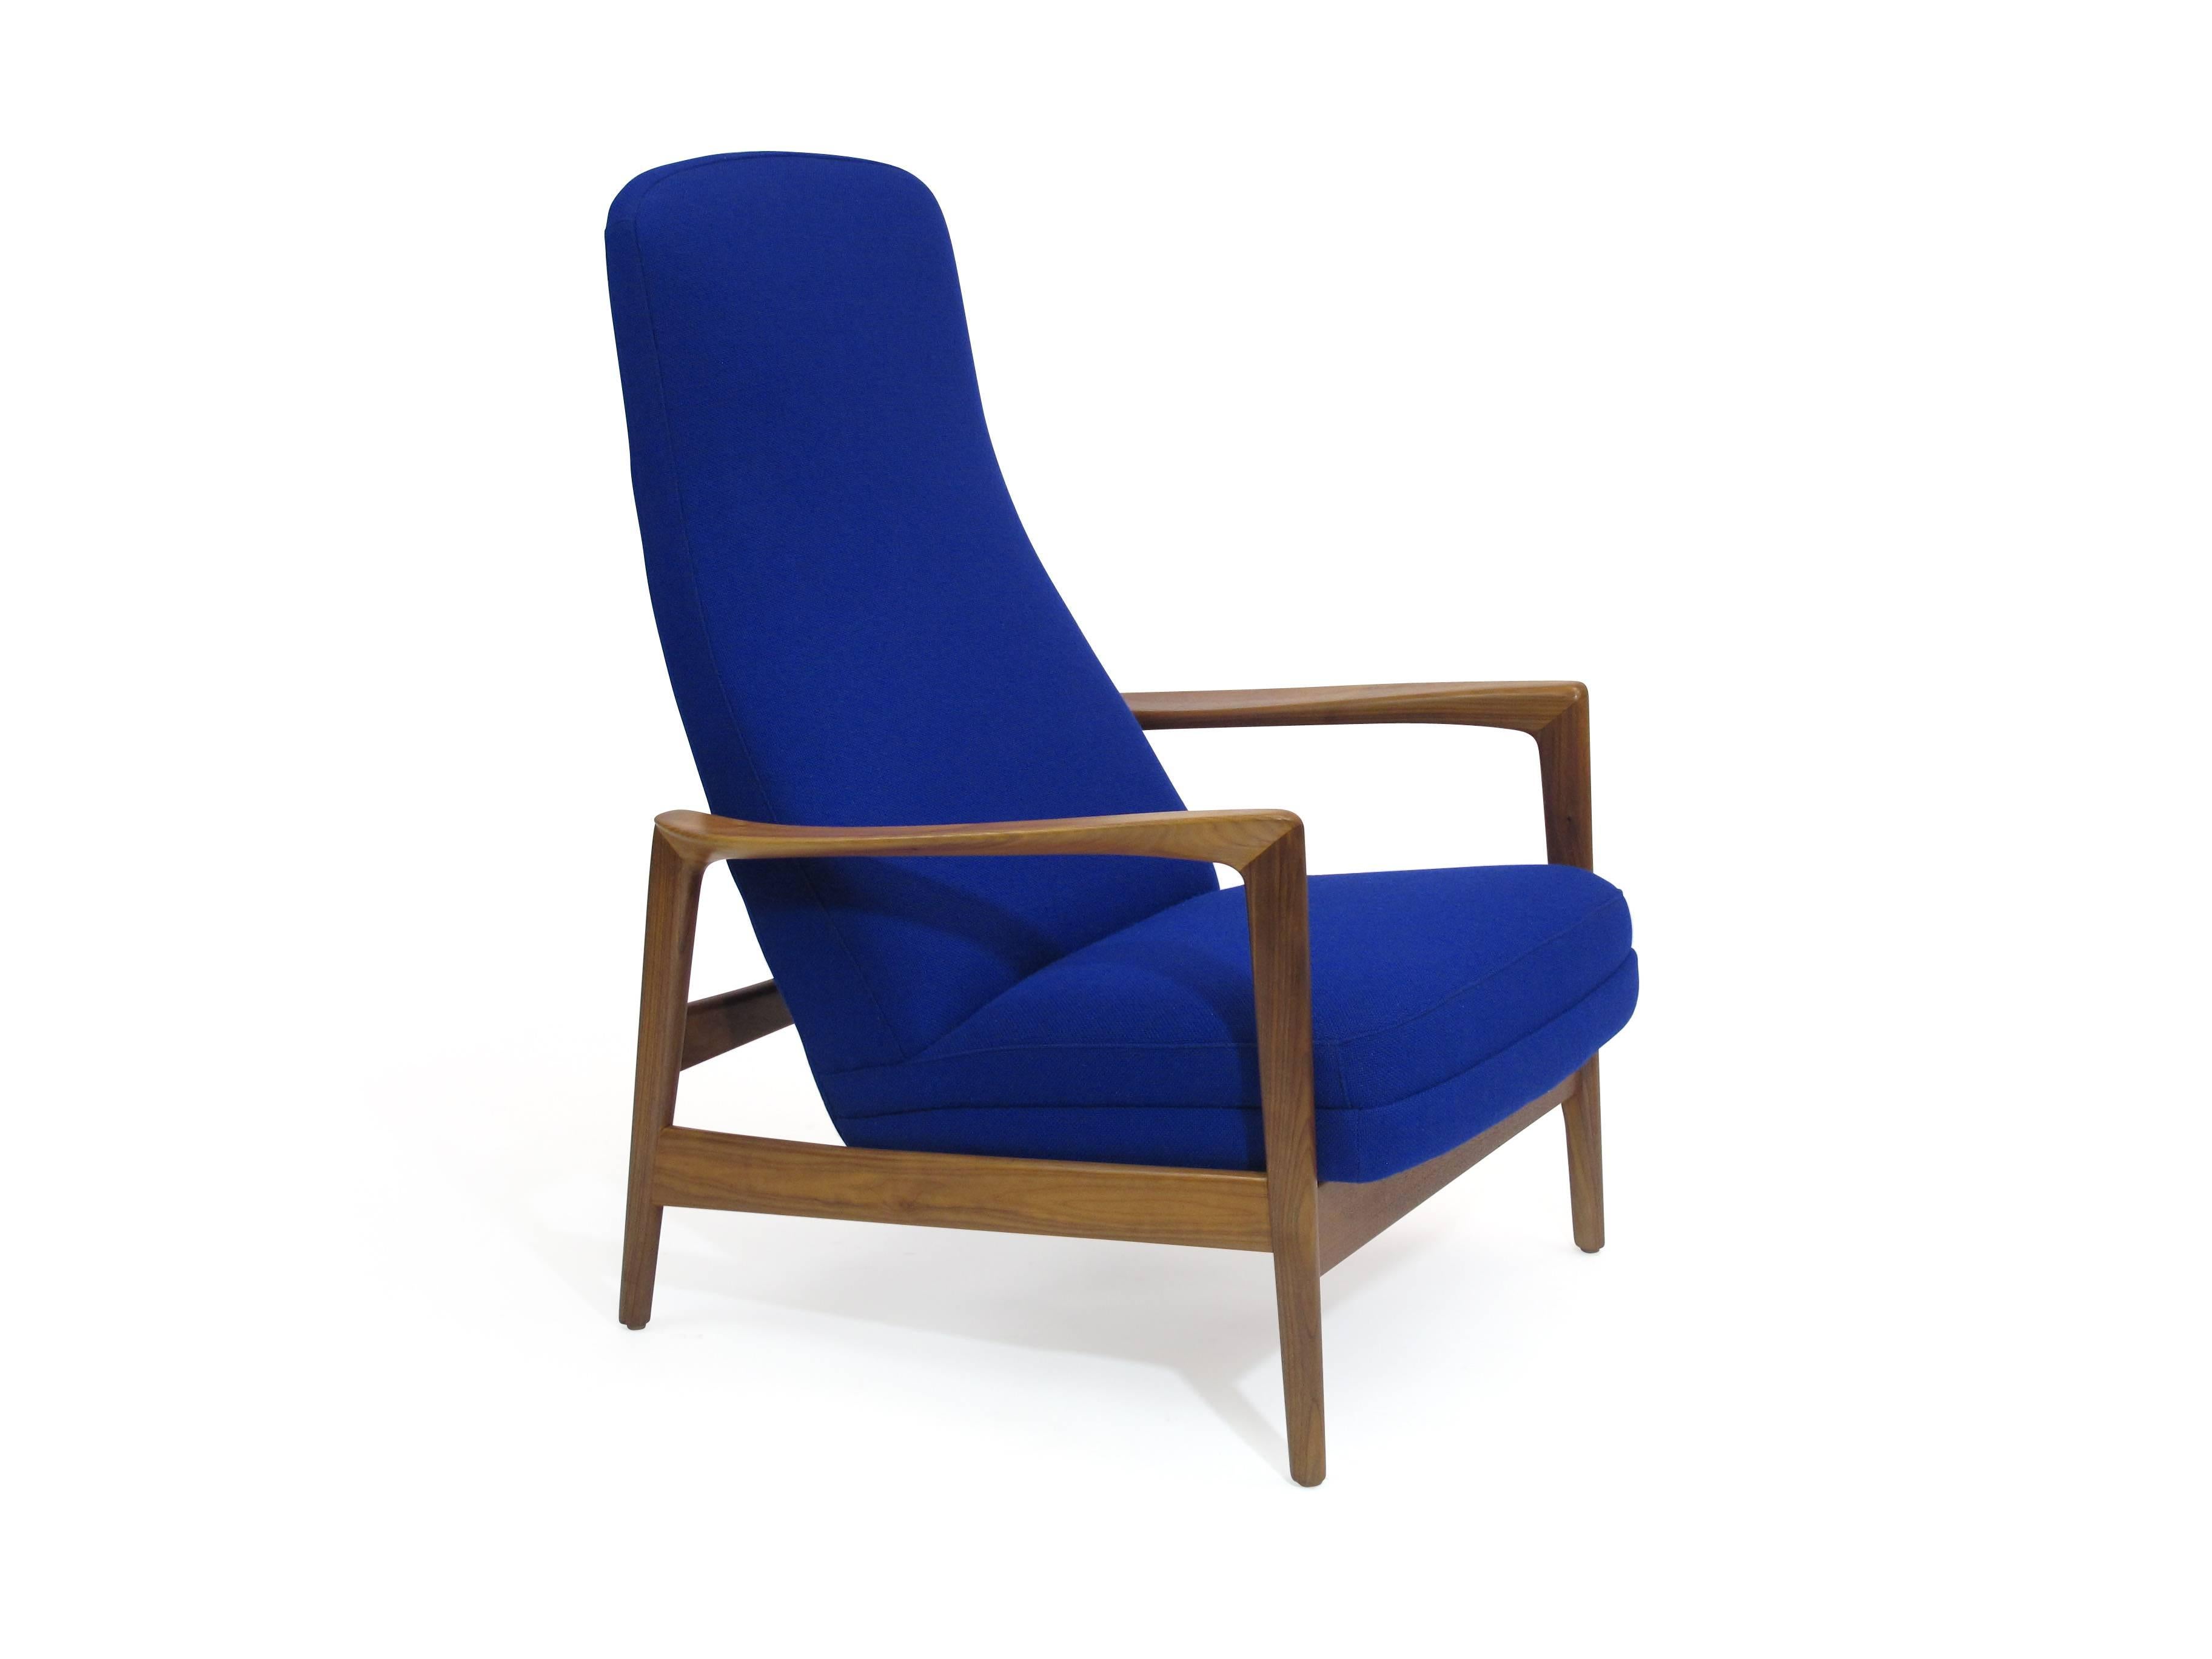 Midcentury walnut lounge chair designed by Folke Ohlsson for DUX. 
Solid walnut frame newly reupholstered with new foam covered in a bright cobalt blue wool fabric. Very comfortable reading chair with rocking motion with adjustable head pillow and